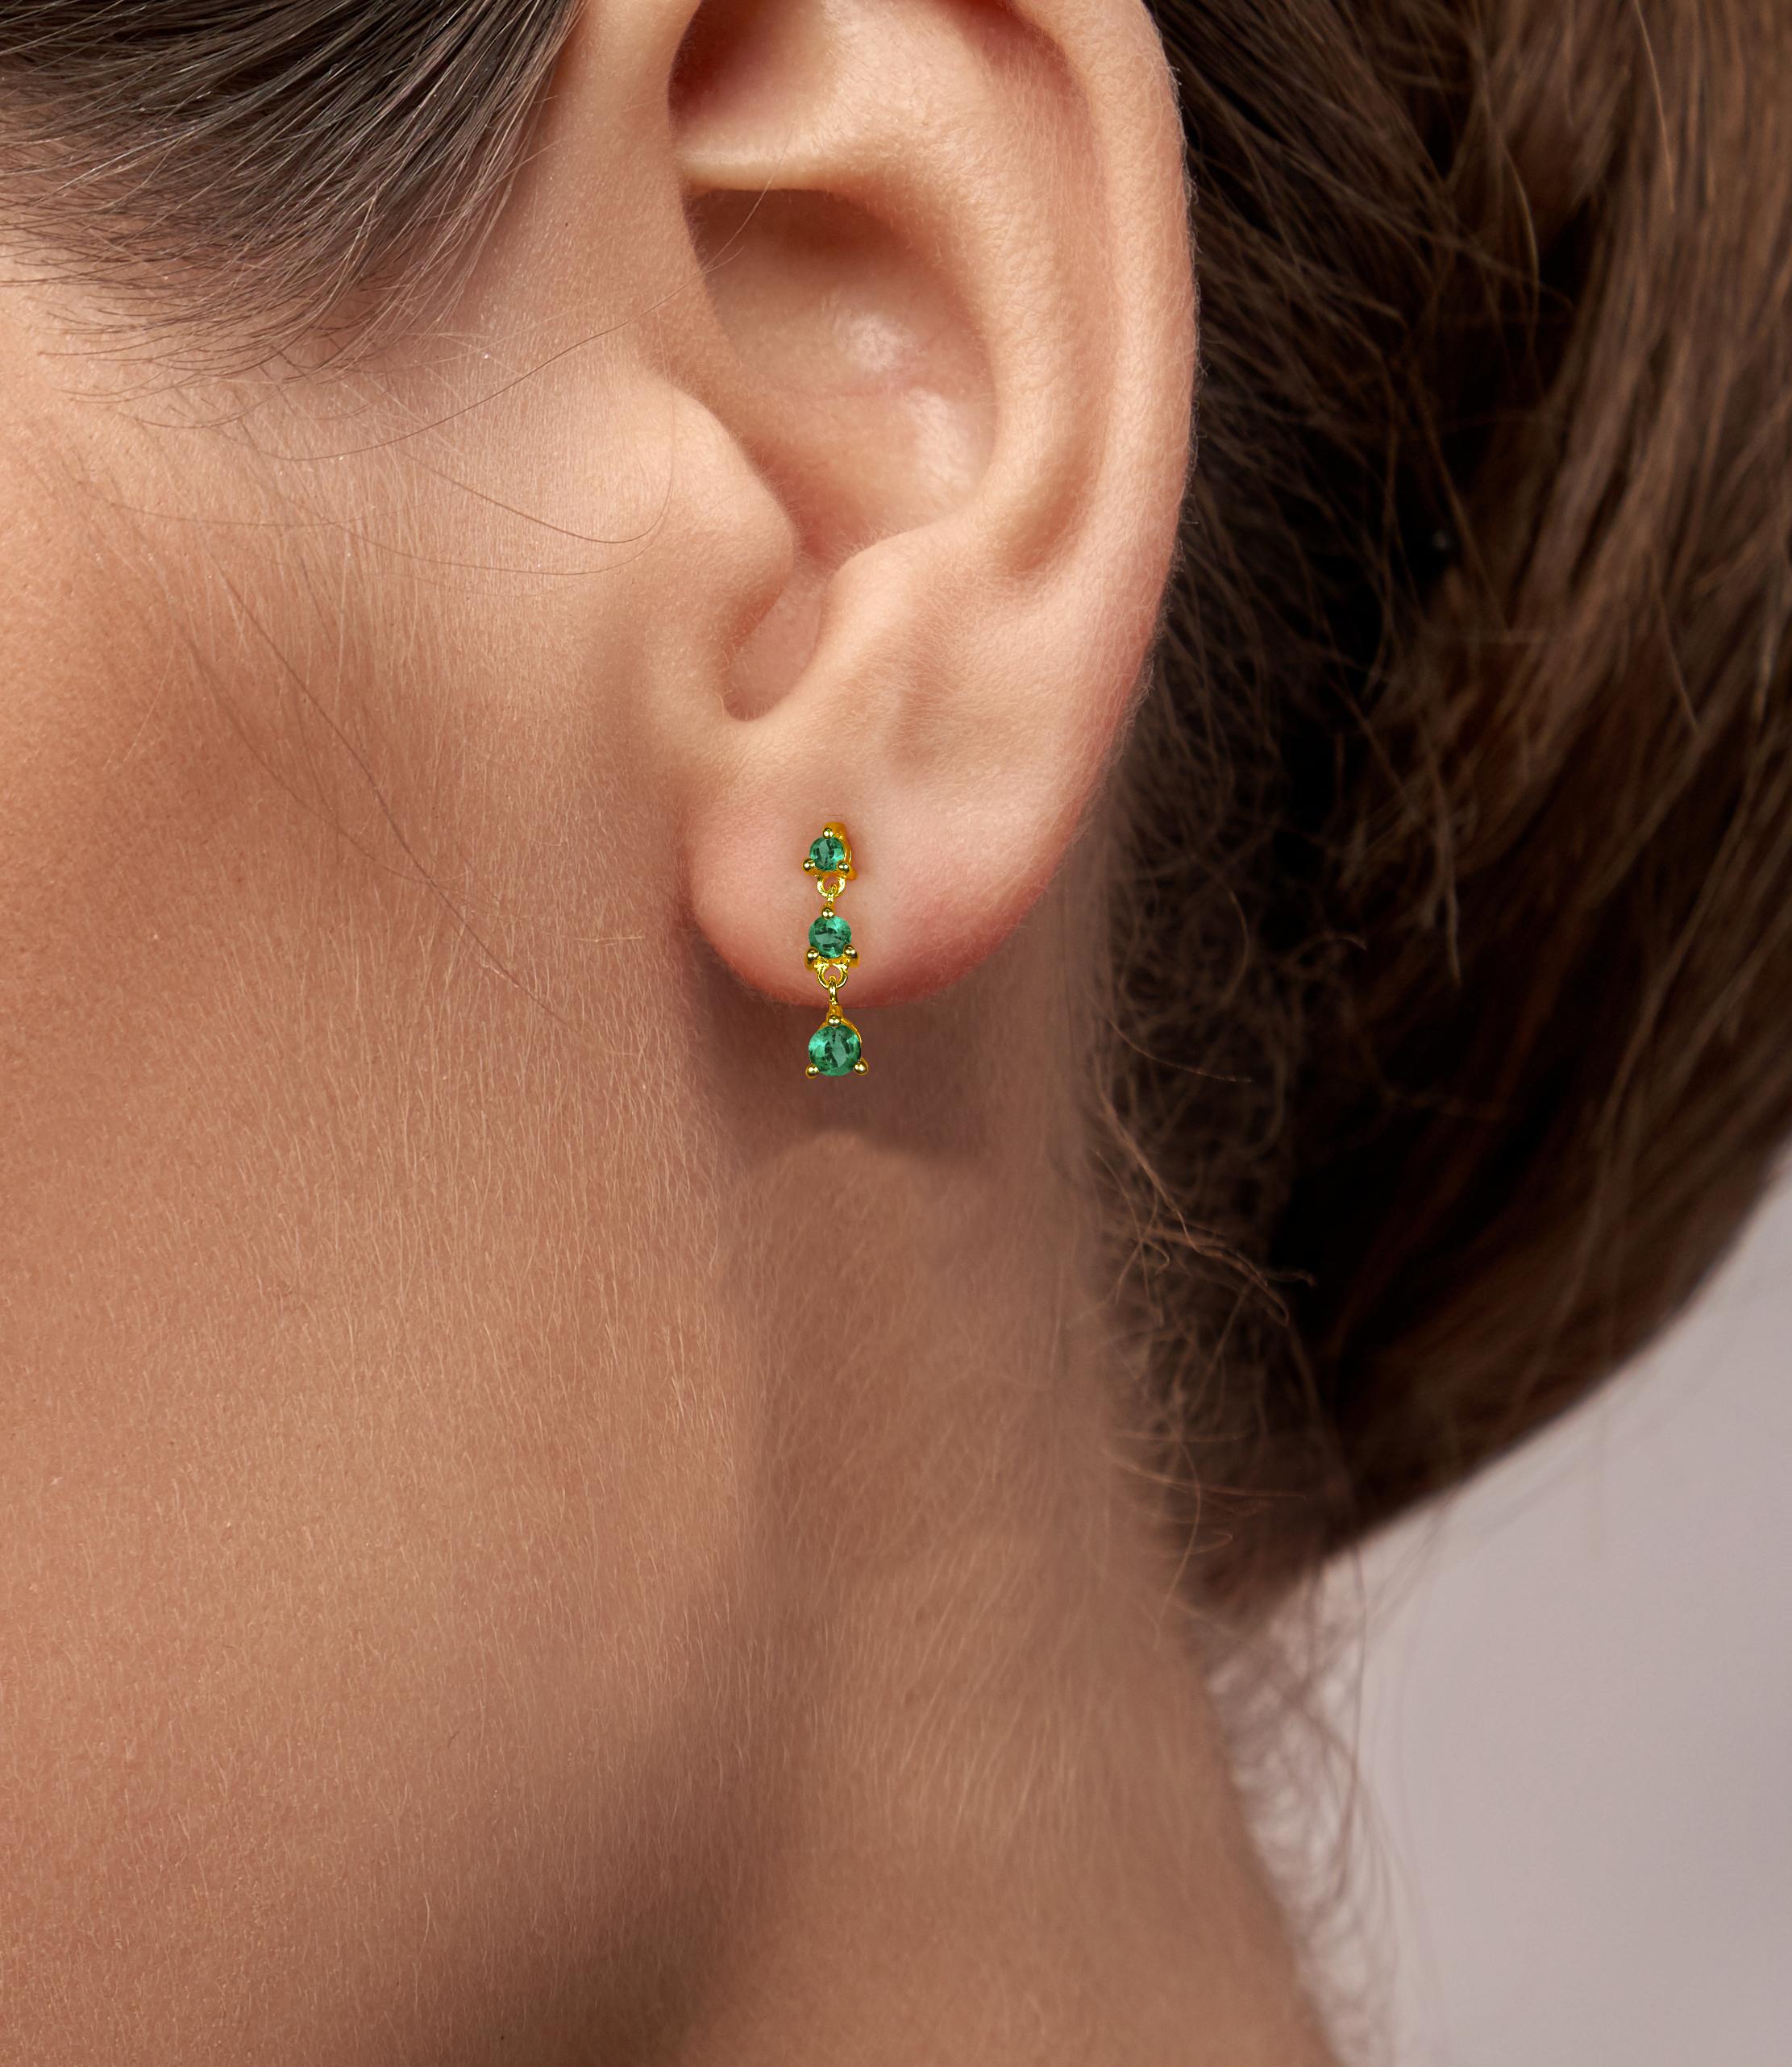 0.45ct Emerald Studs Earrings in 14k Gold For Sale 2